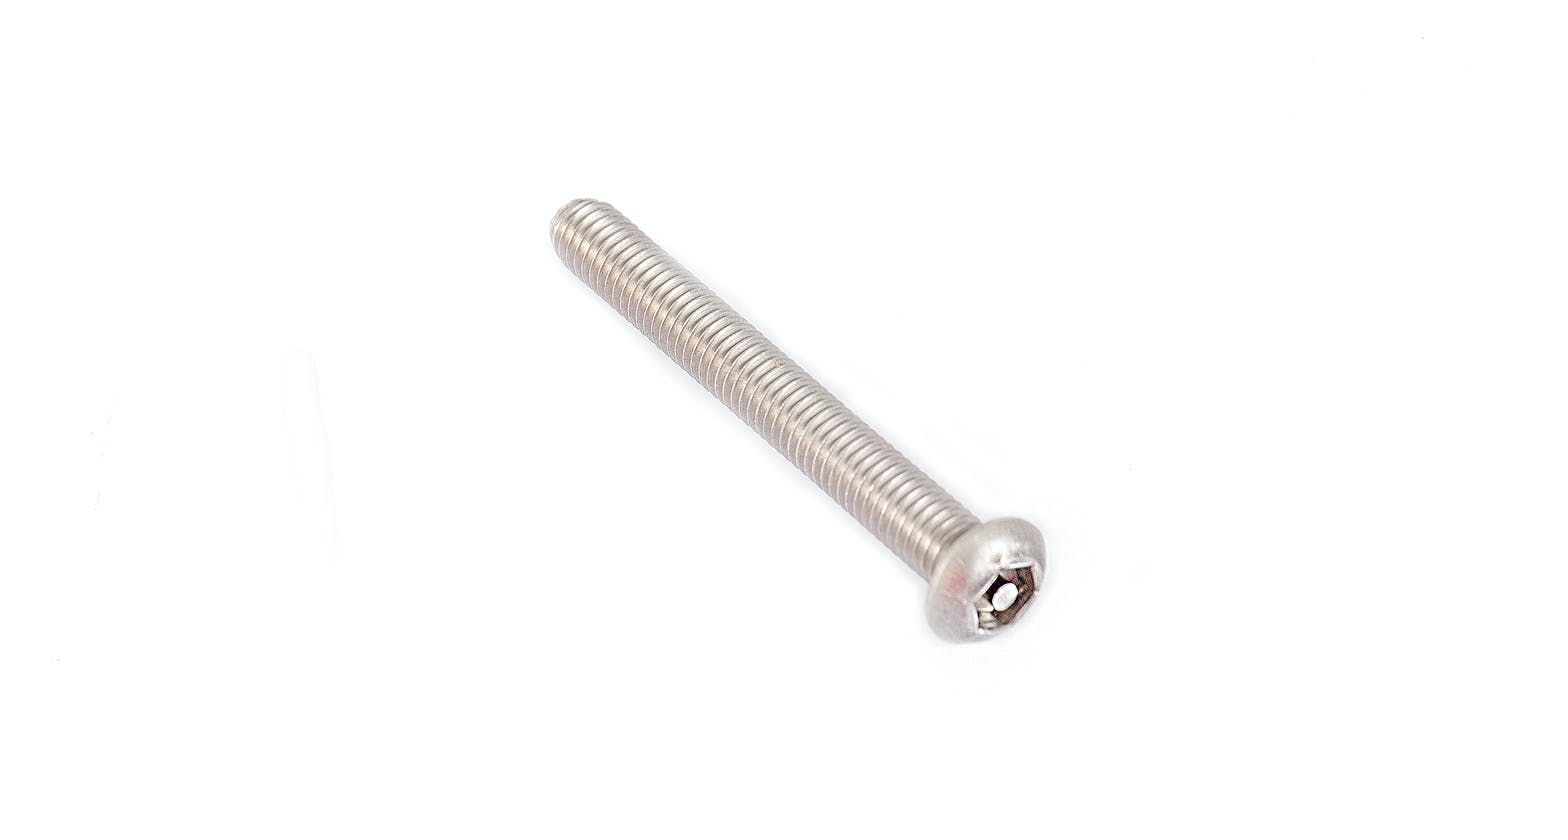 Rhino-Rack B128-BP M6 x 50mm Button Head Security Screw (Stainless Steel) (6 Pack)